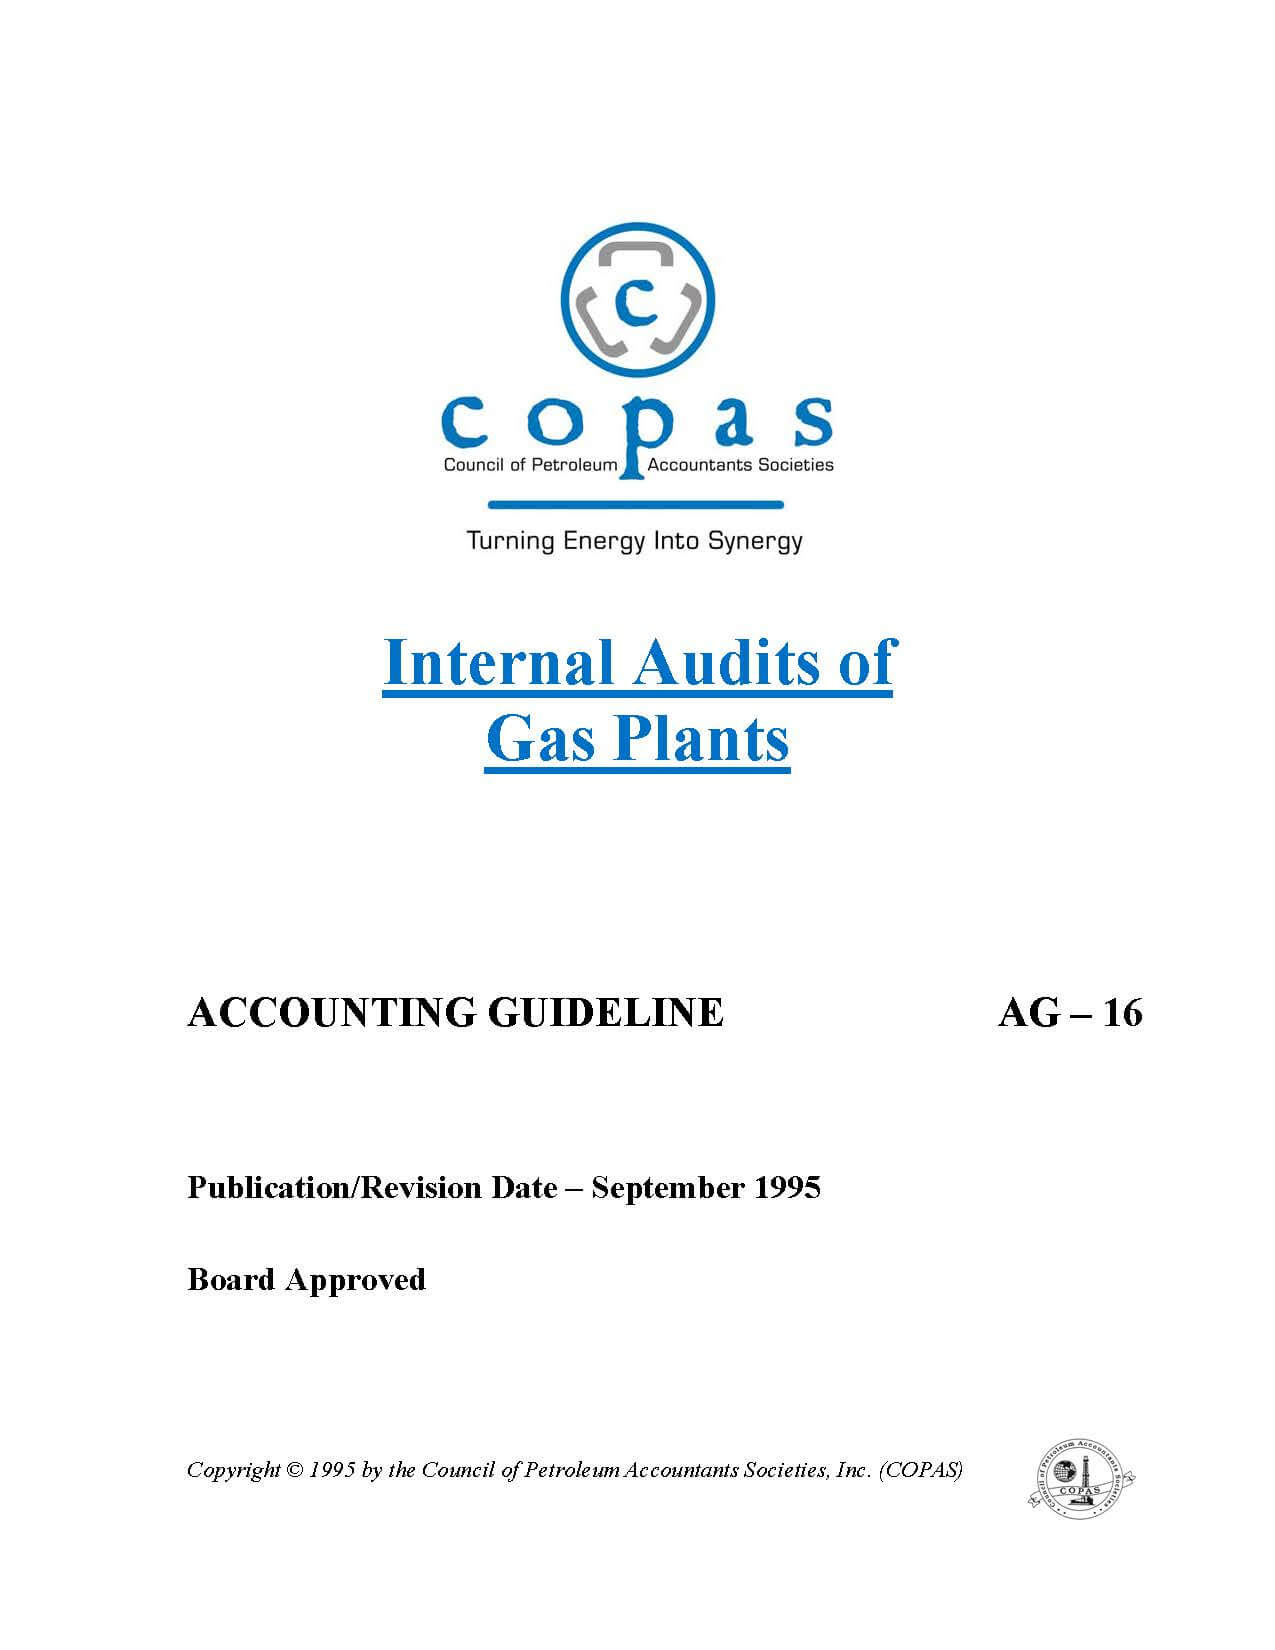 AG-16 Internal Audits of Gas Plants - products AG 16 Internal Audits of Gas Plants - Council of Petroleum Accountants Societies